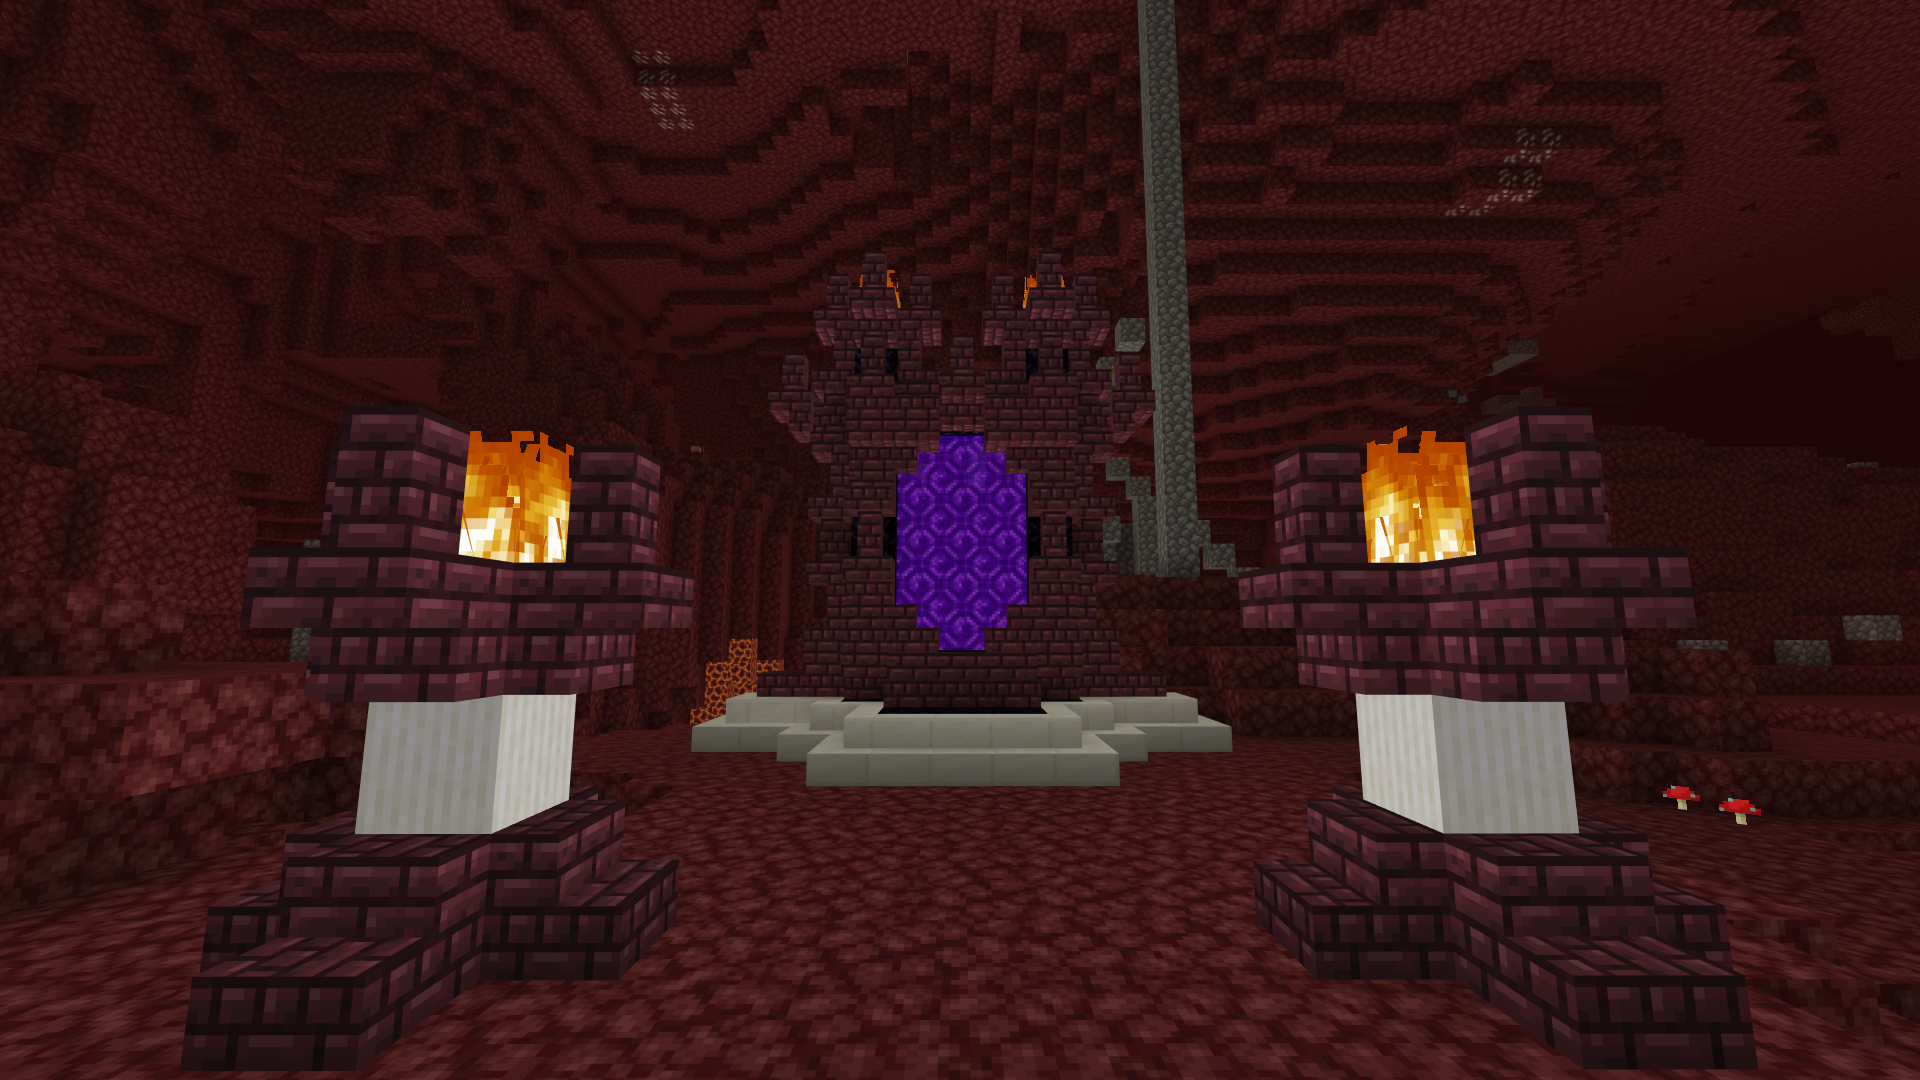 I tried decorating my nether portal sorry for the cobblestone